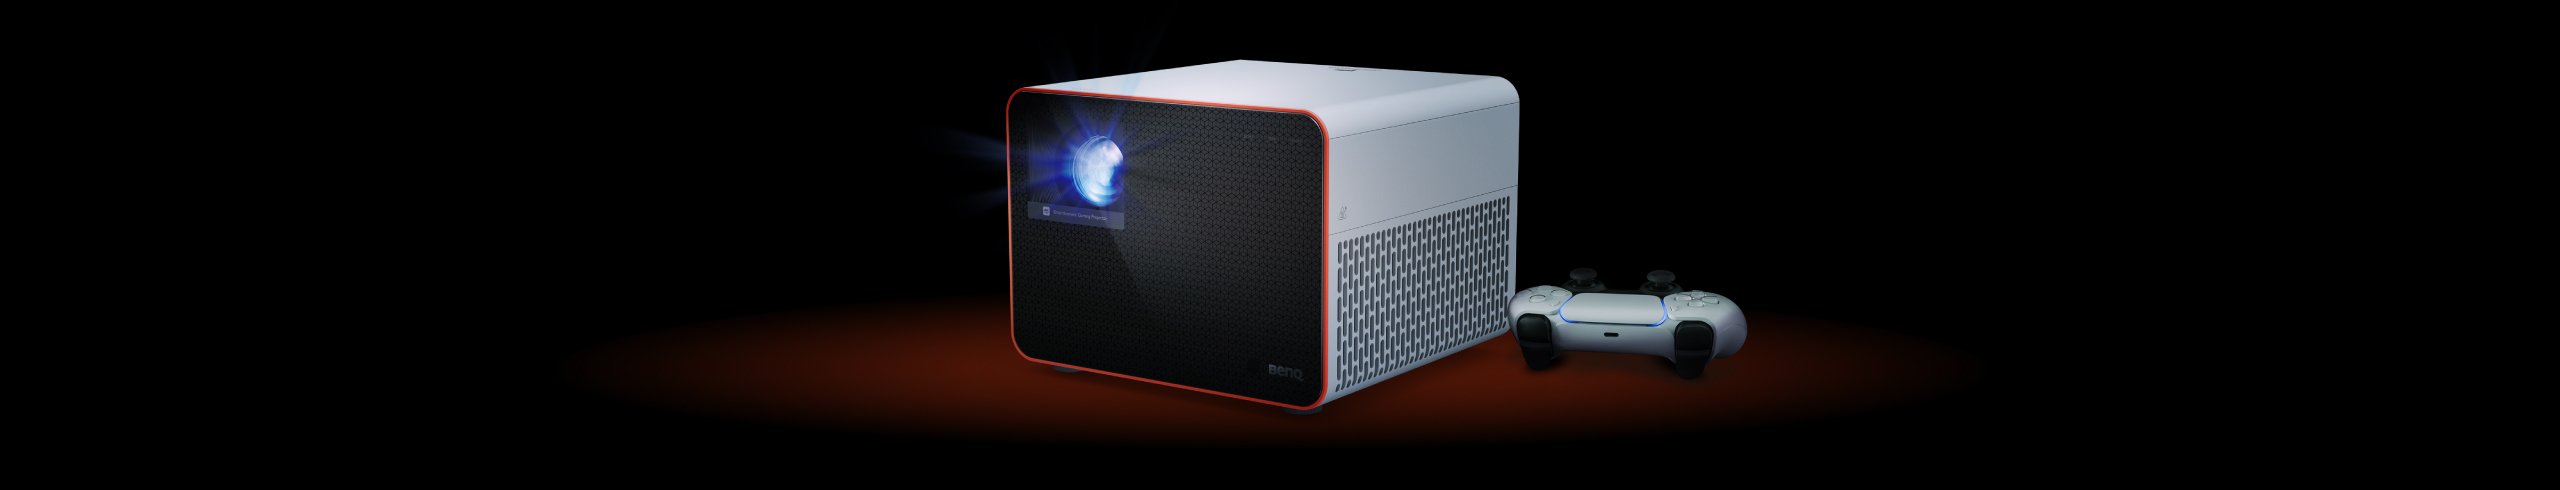 BenQ X3000i Gaming Projector Brings Immersive Open-World Gaming Experience Home